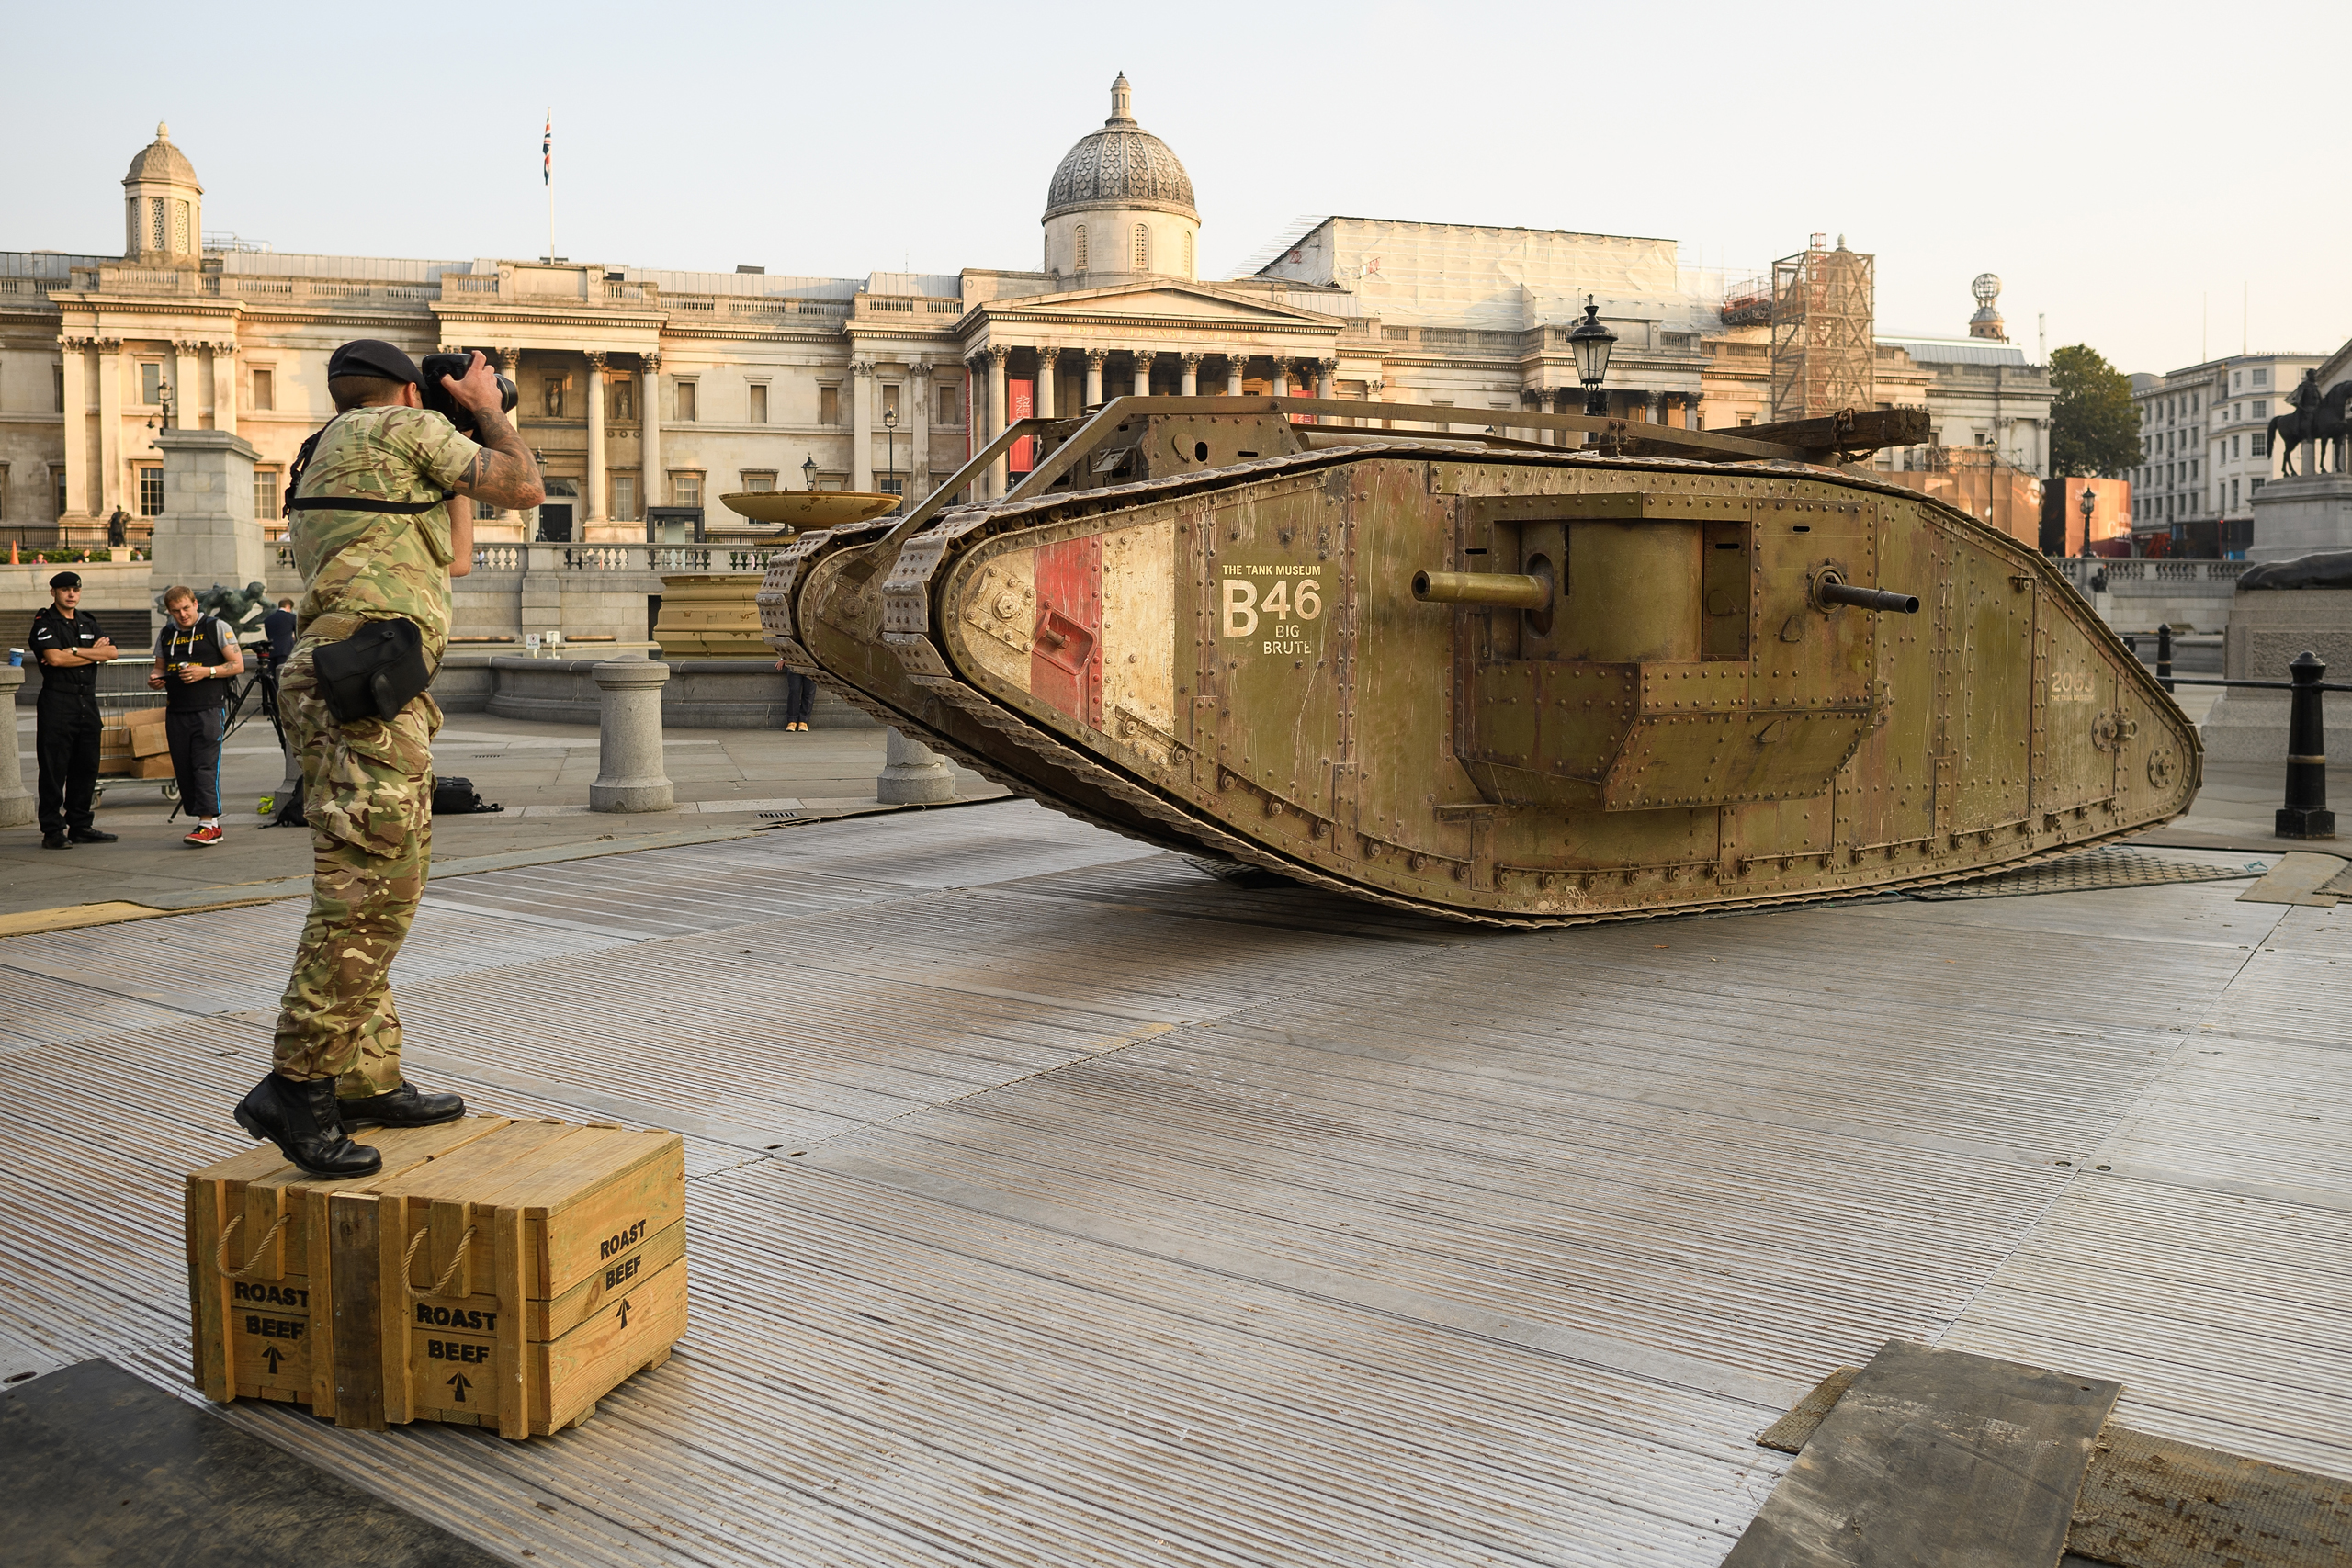 The Tank Was First Used 100 Years Ago Today | Time